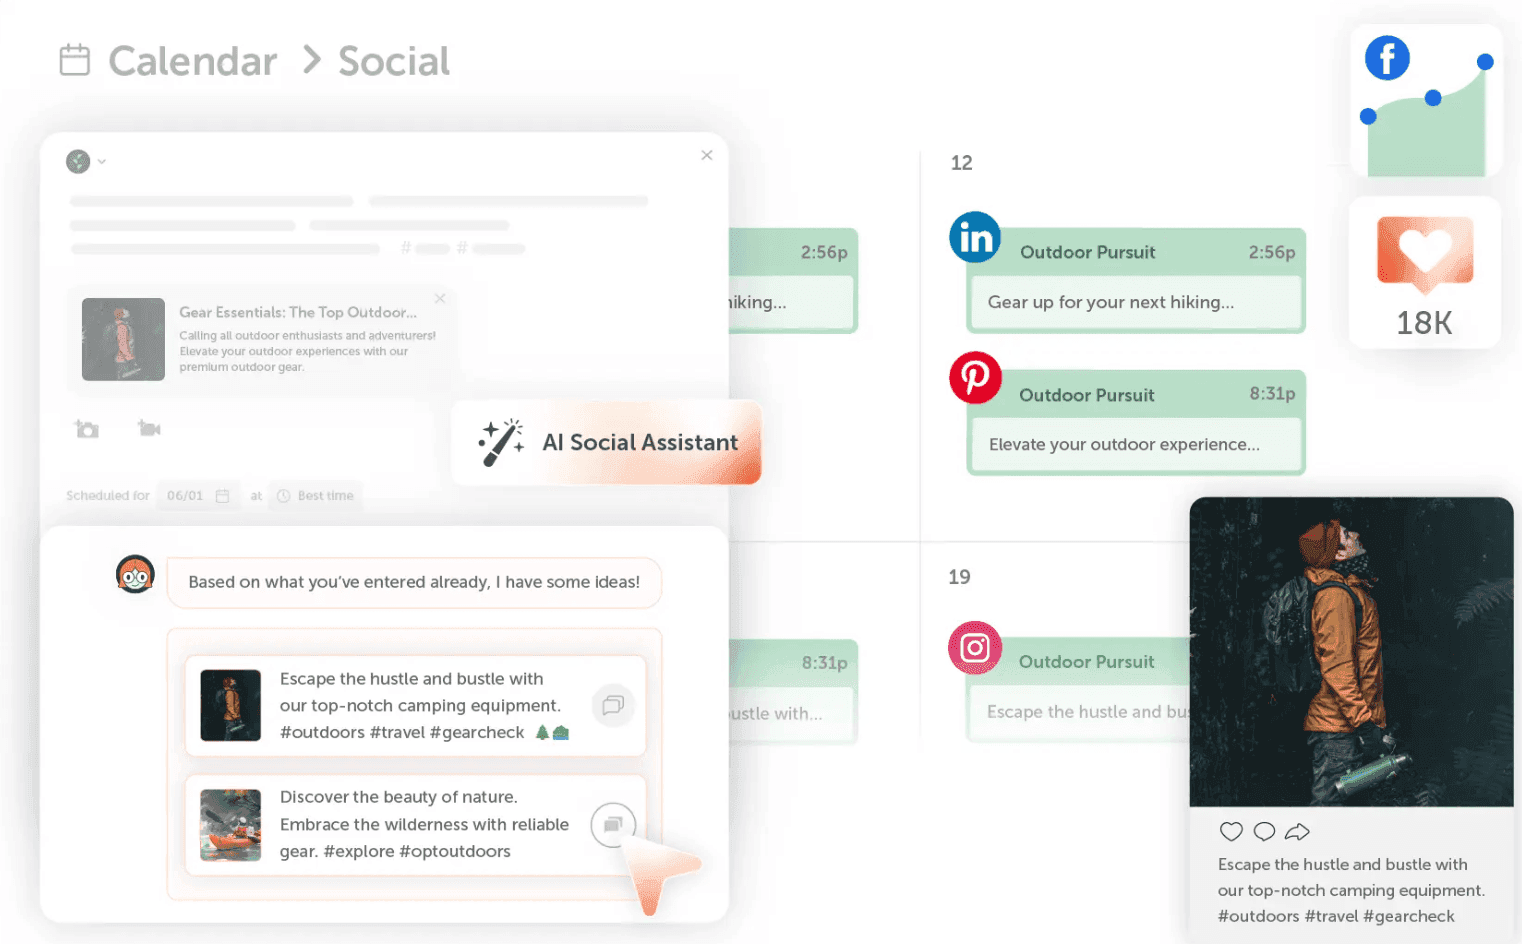 CoSchedule social calendar with social media post planning